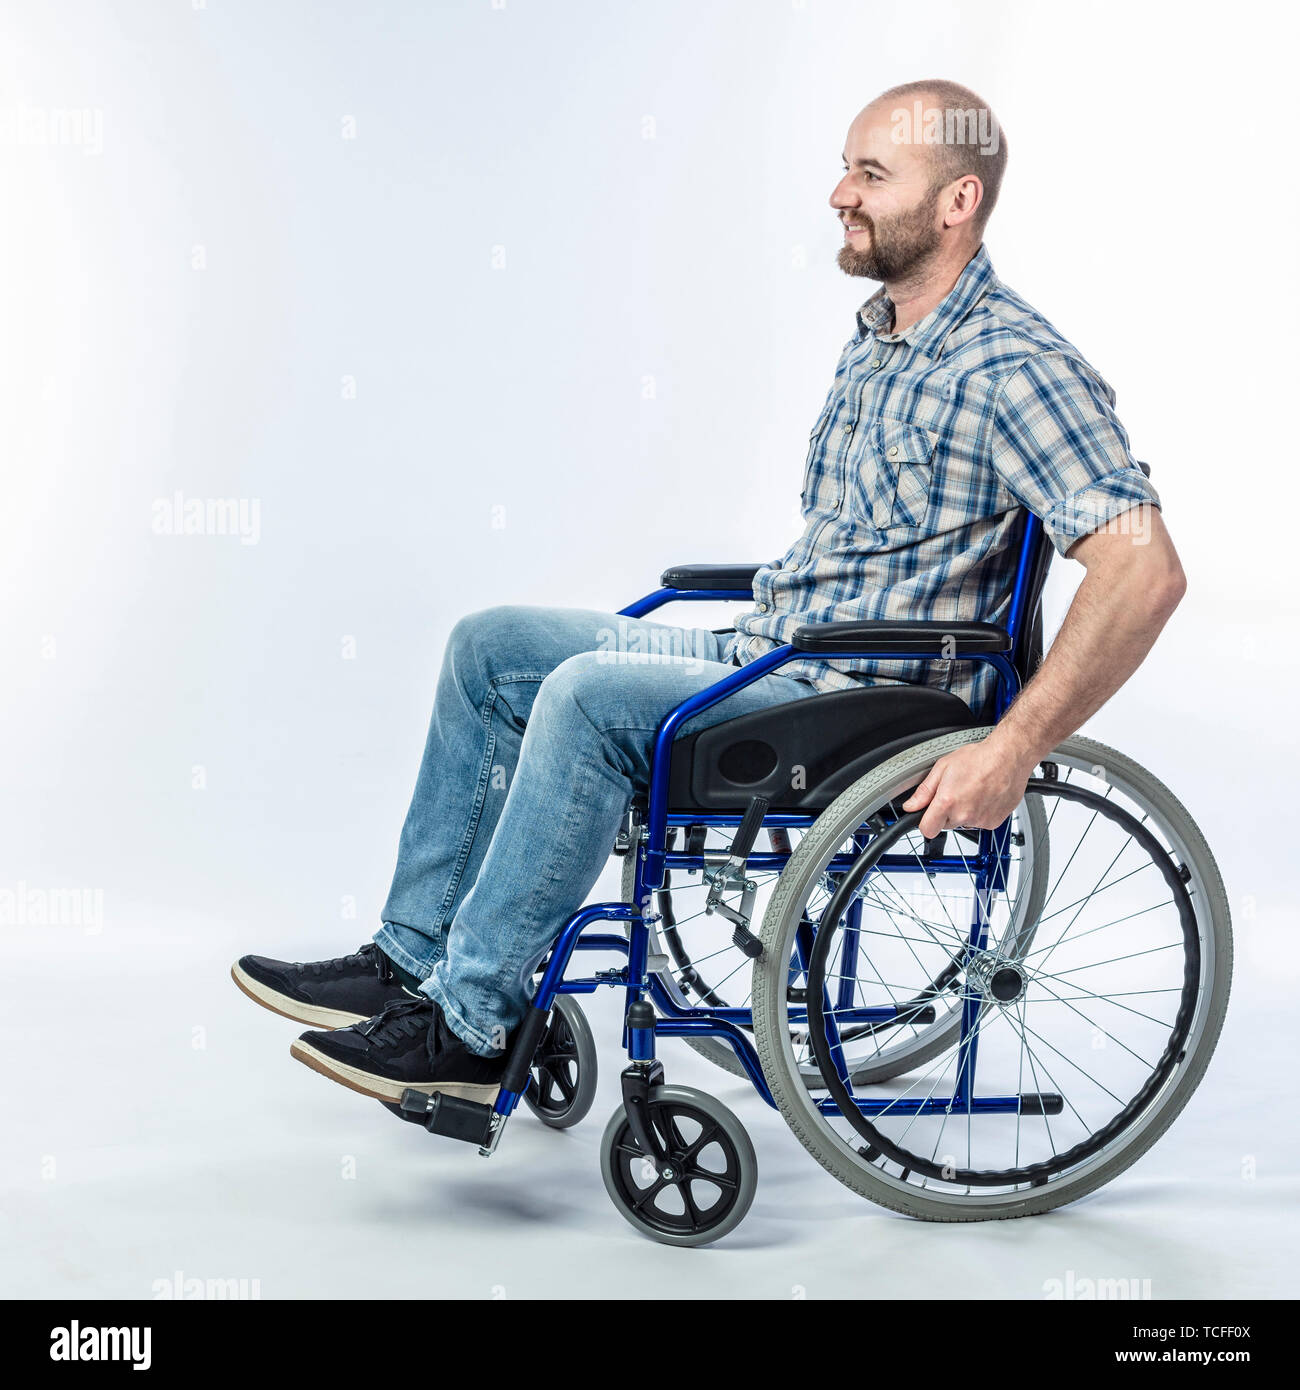 Smiling disabled man sitting in a wheelchair. Positive expression and casual clothes. Stock Photo